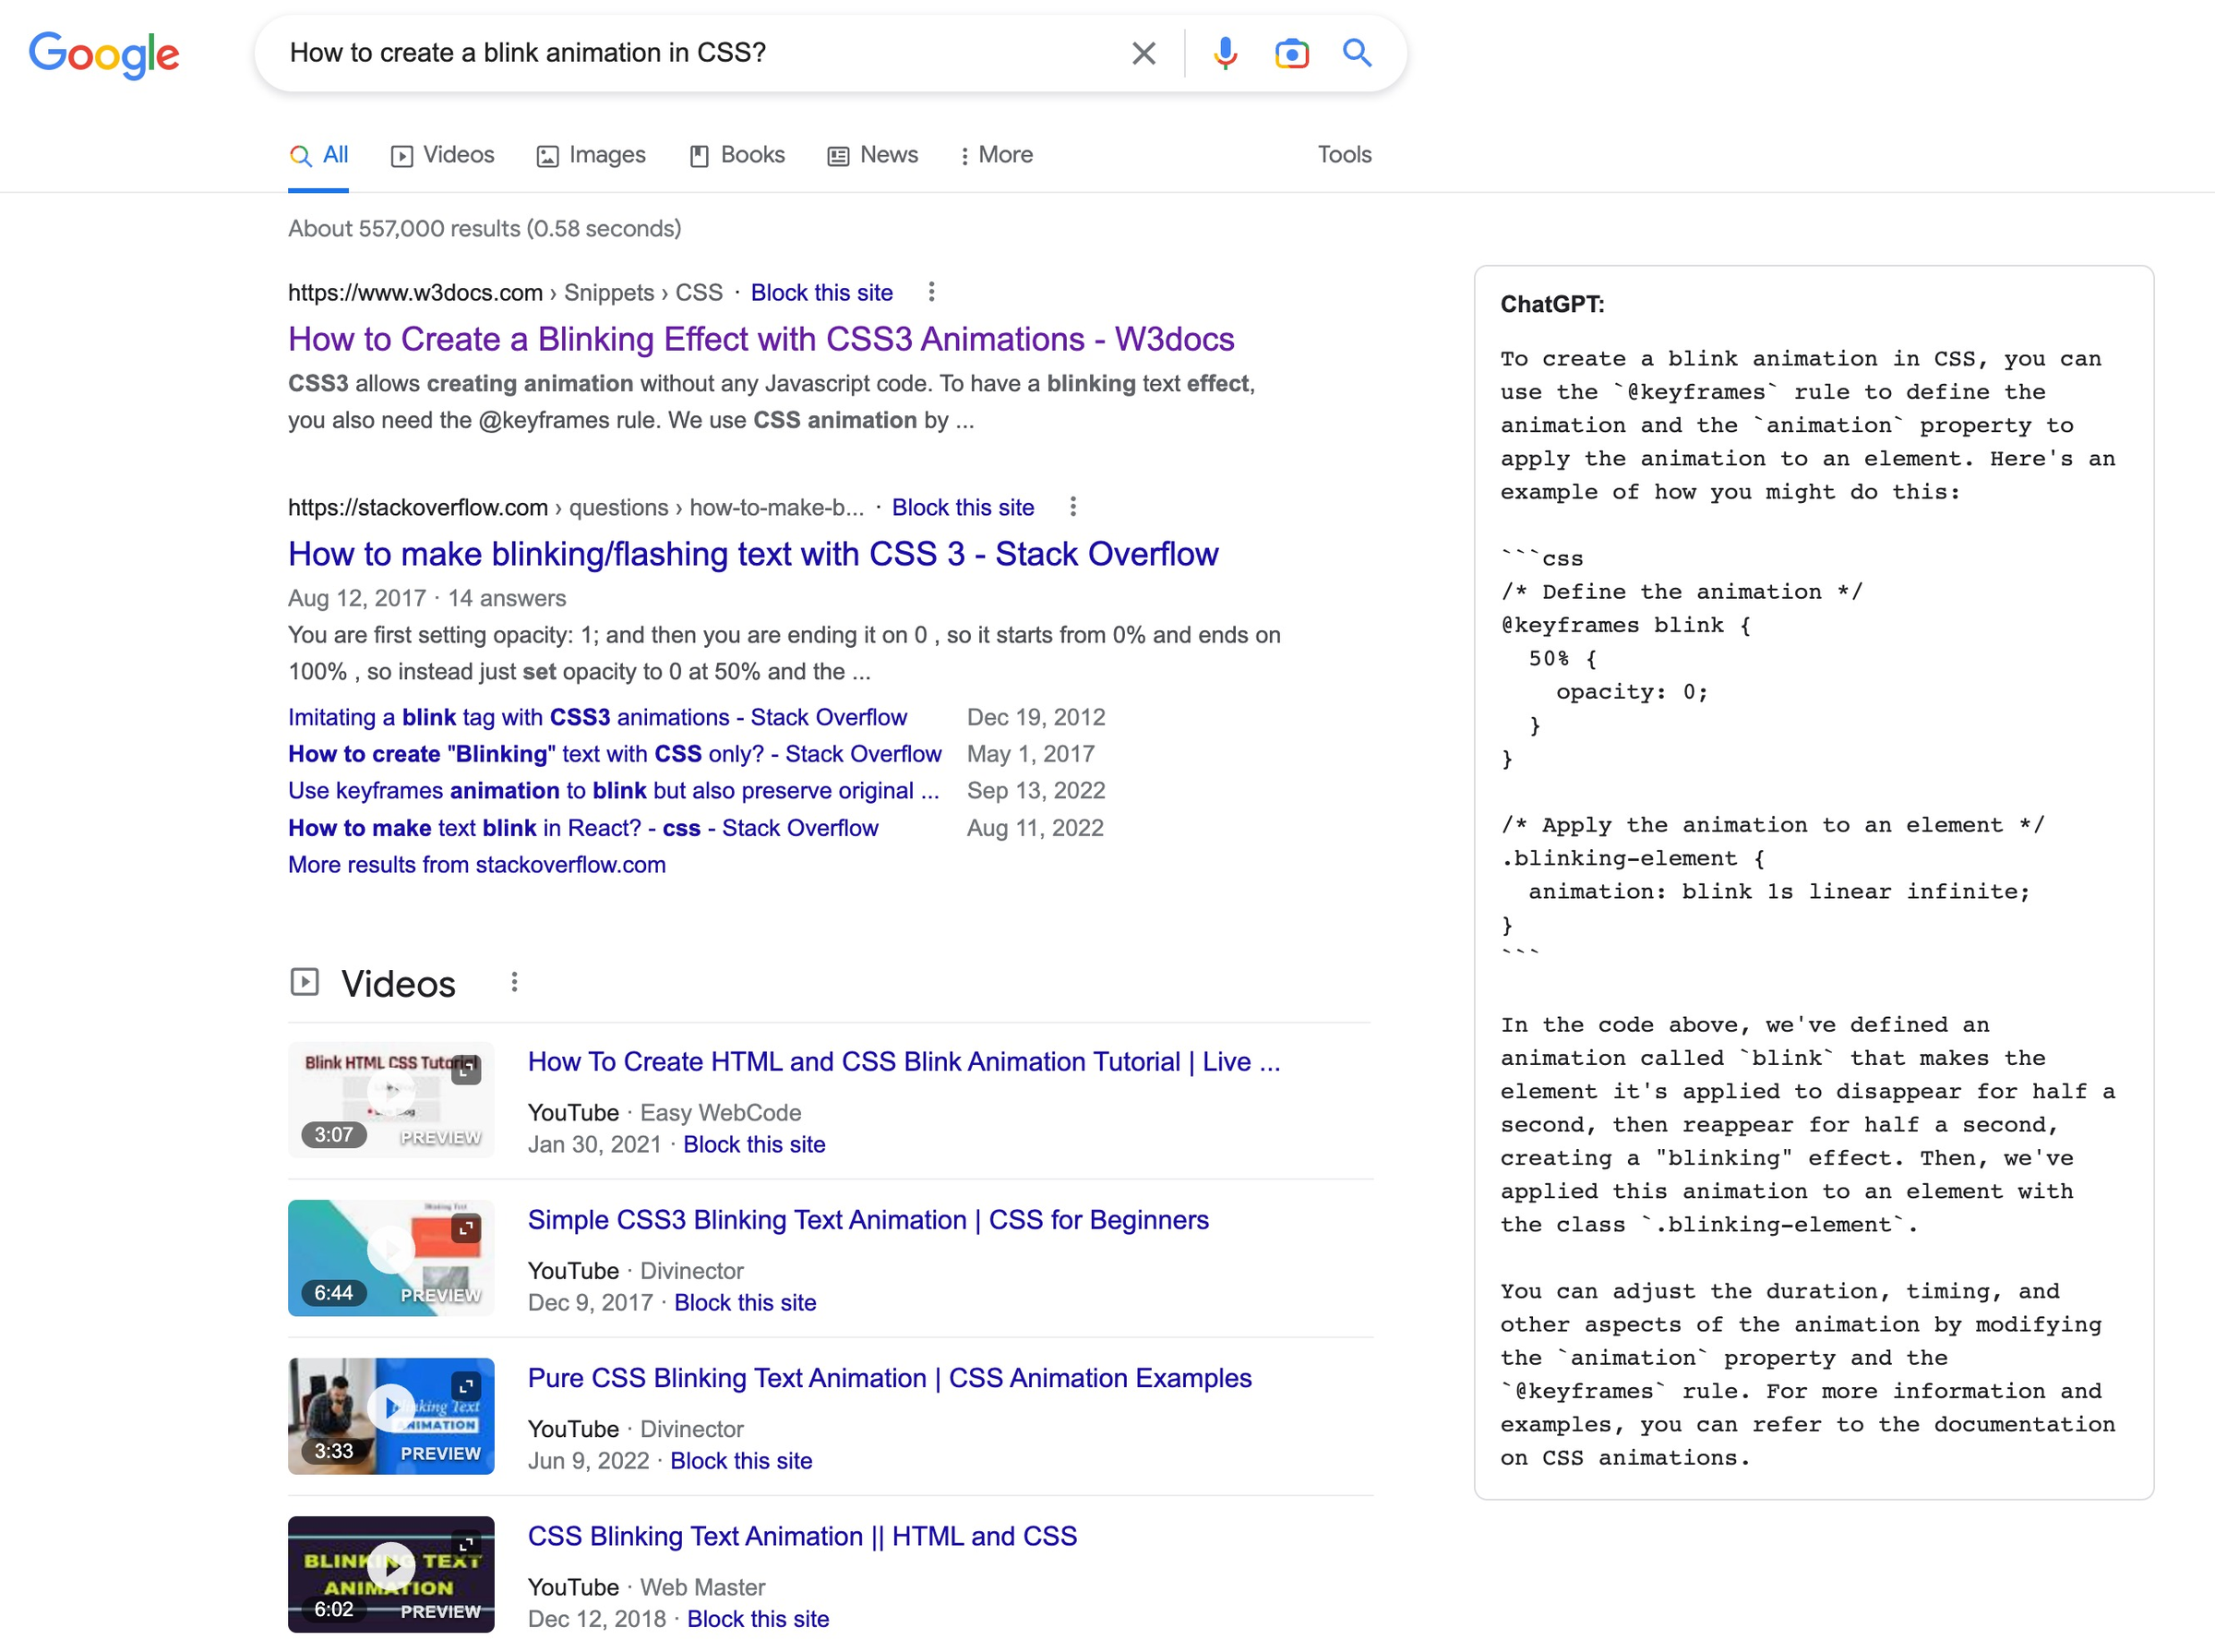 ChatGPT for Google - ChatGPT response alongside search engine results